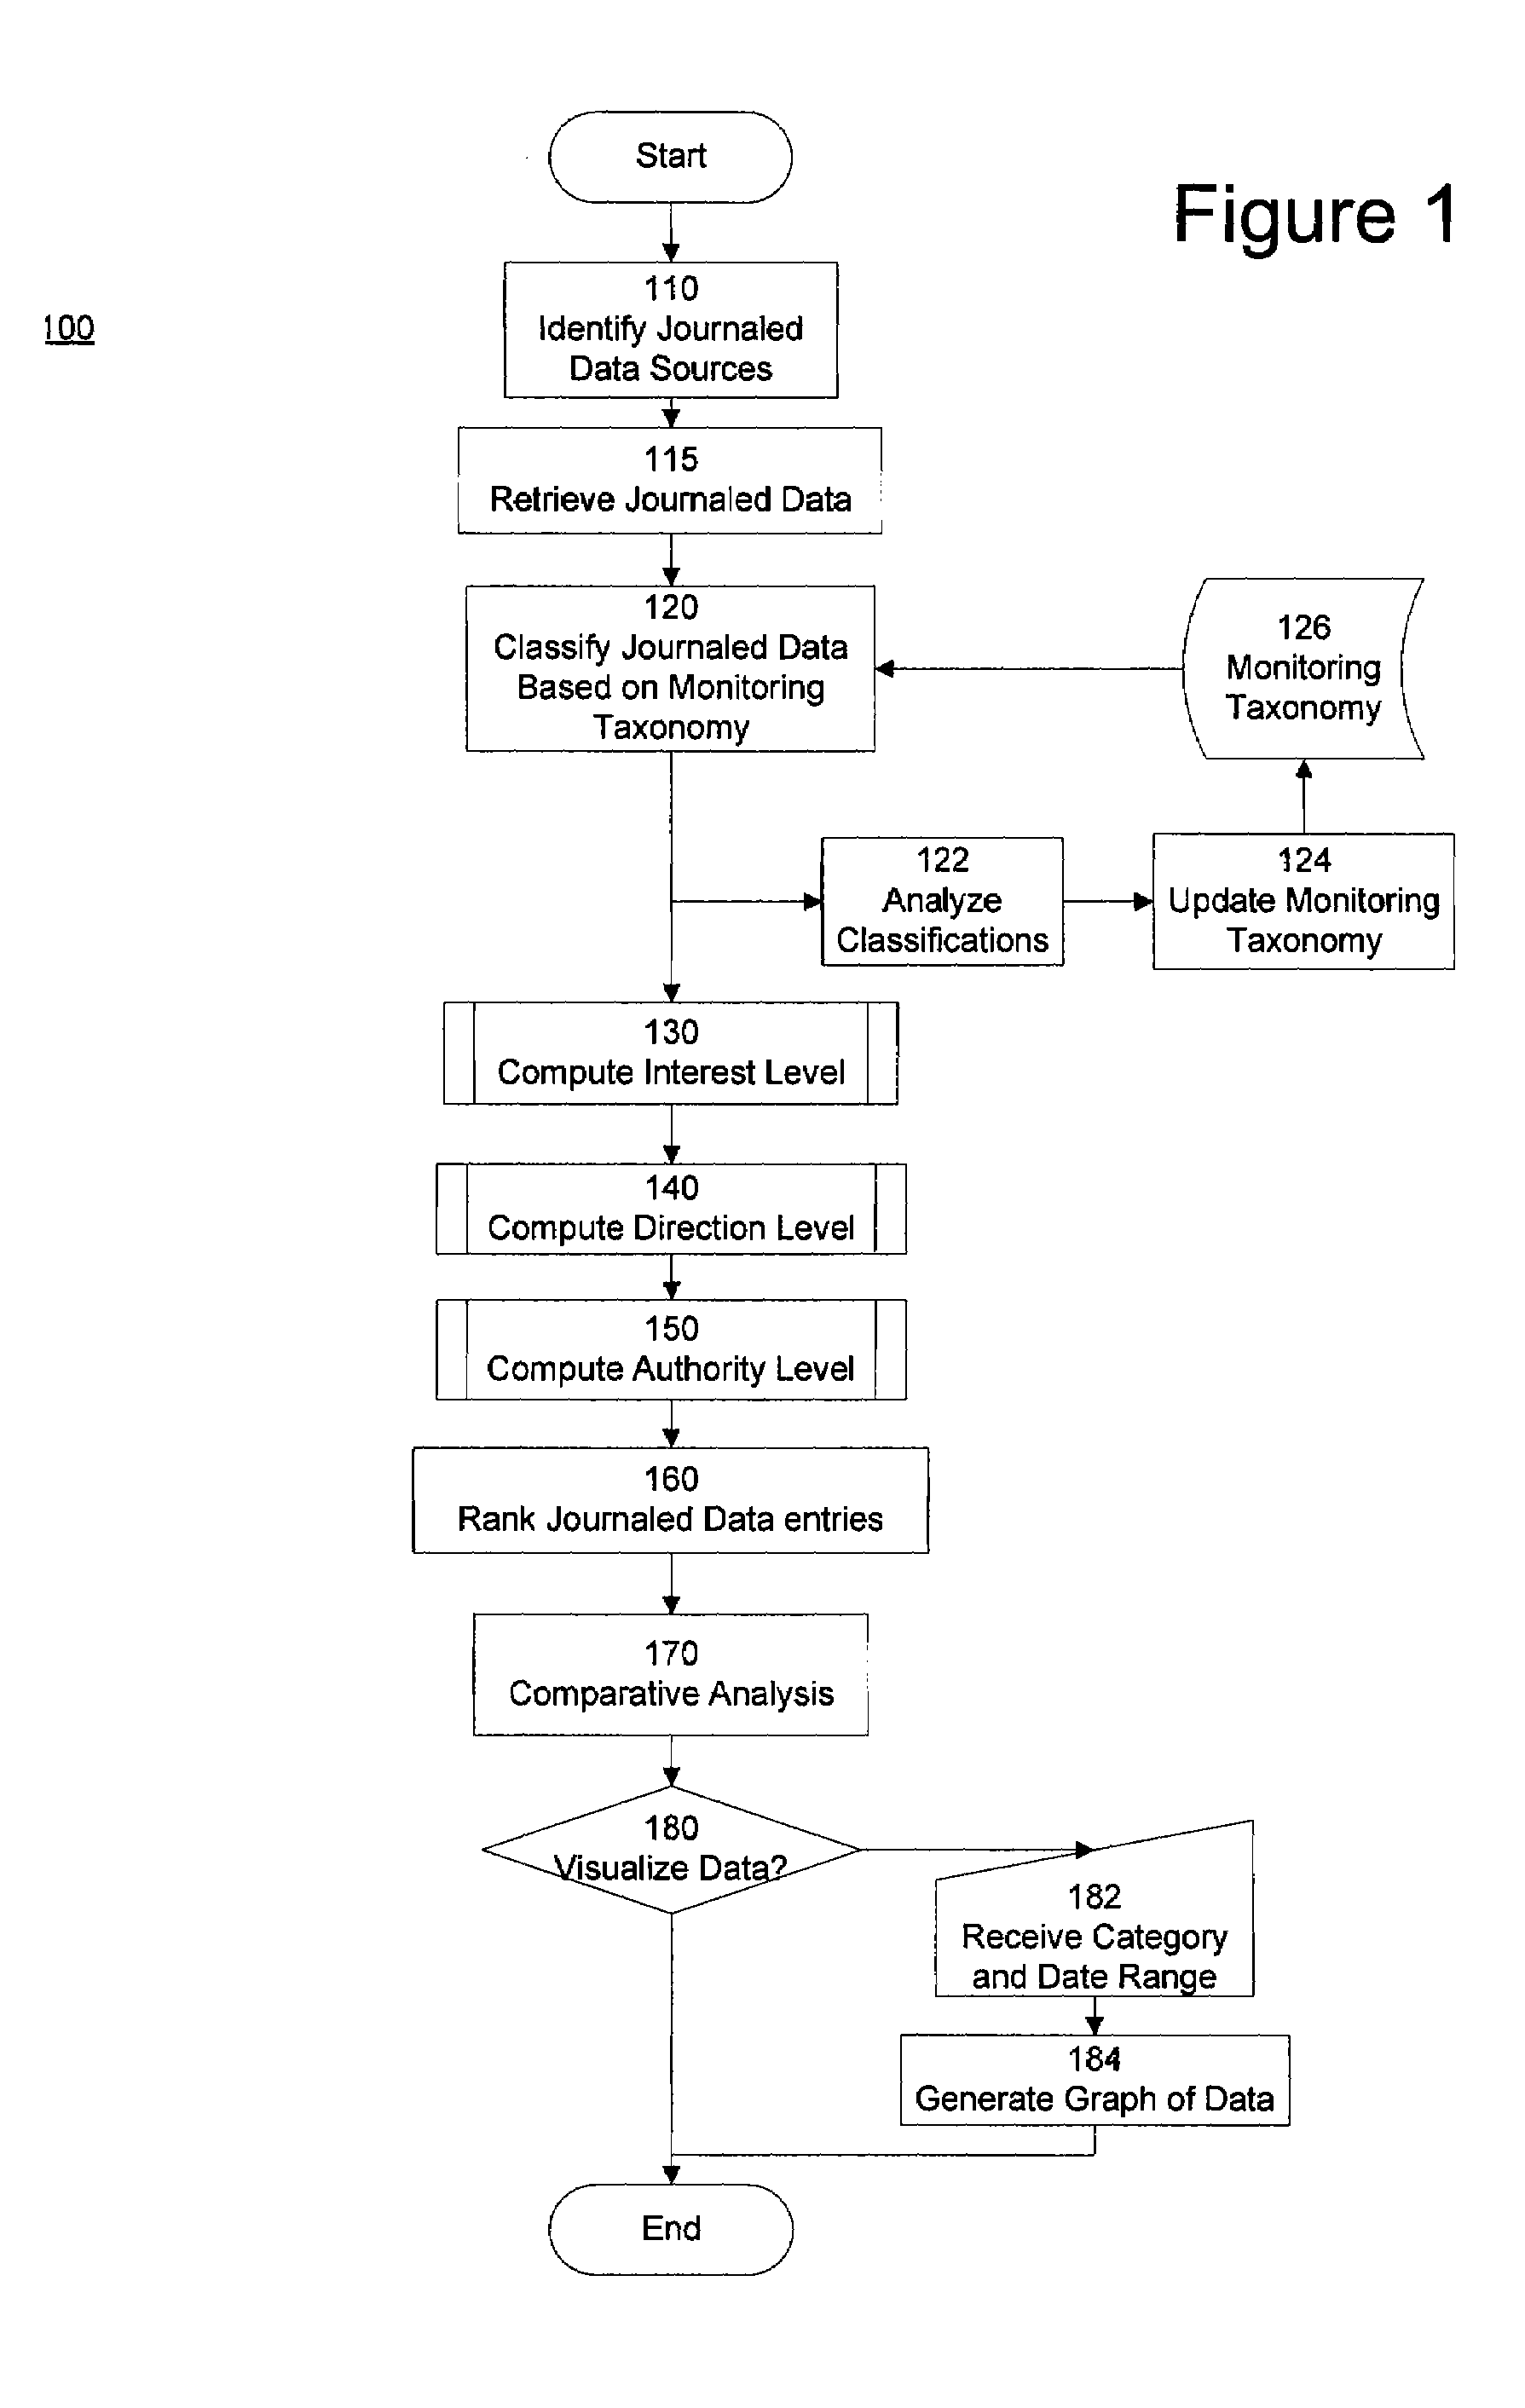 Method and system for integrating rankings of journaled internet content and consumer media preferences for use in marketing profiles